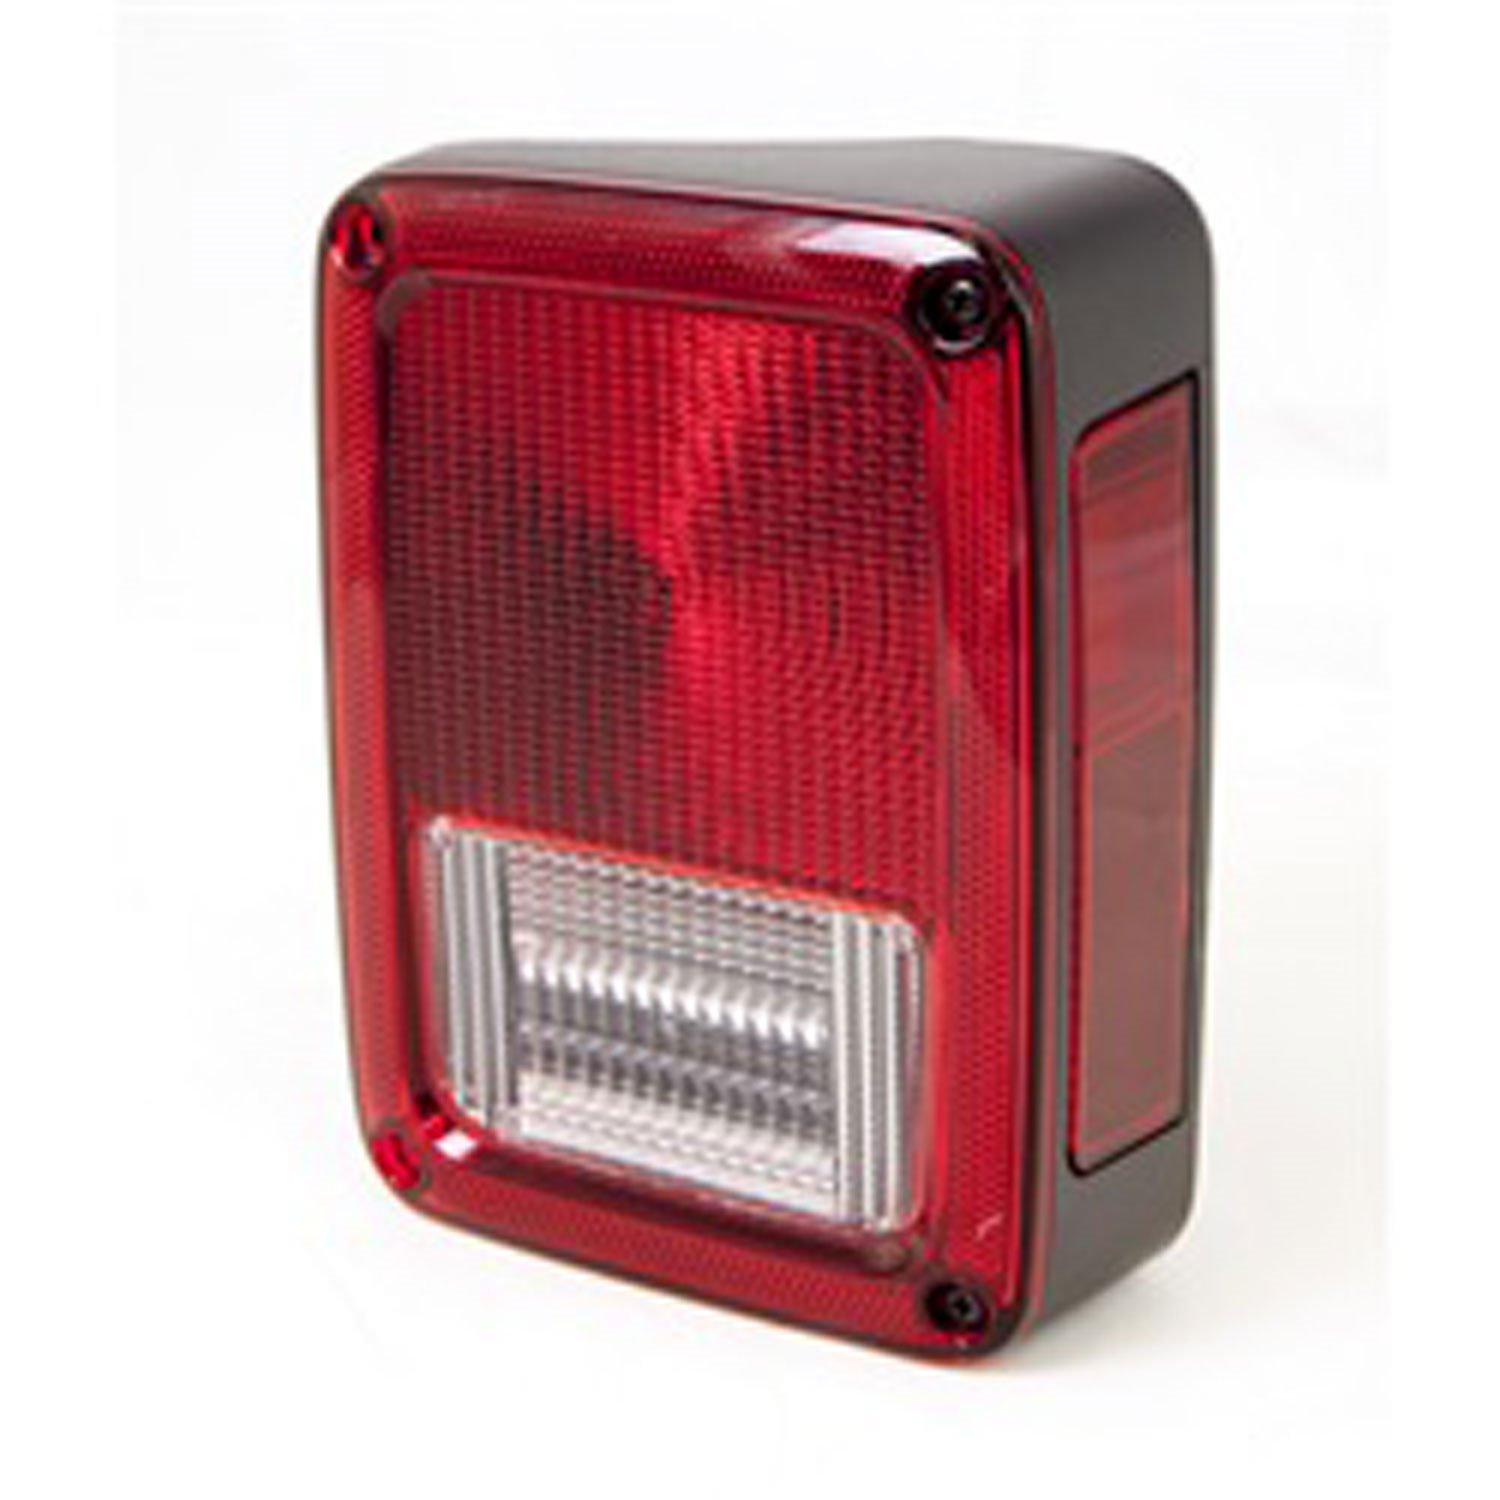 Replacement tail light assembly from Omix-ADA, Fits right side of 07-16 Jeep Wrangler JK